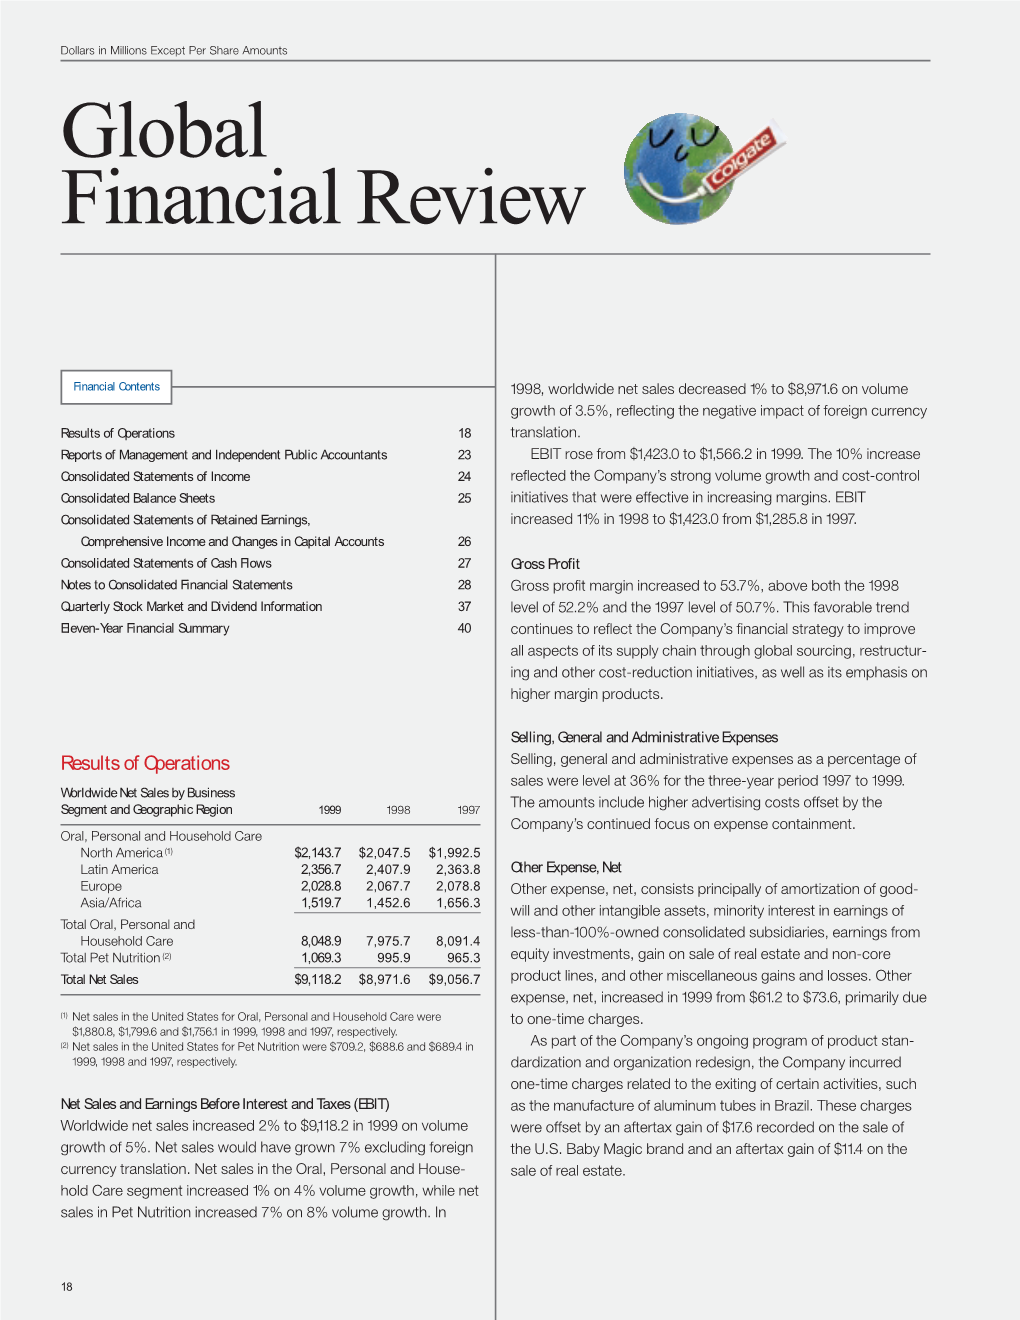 Global Financial Review